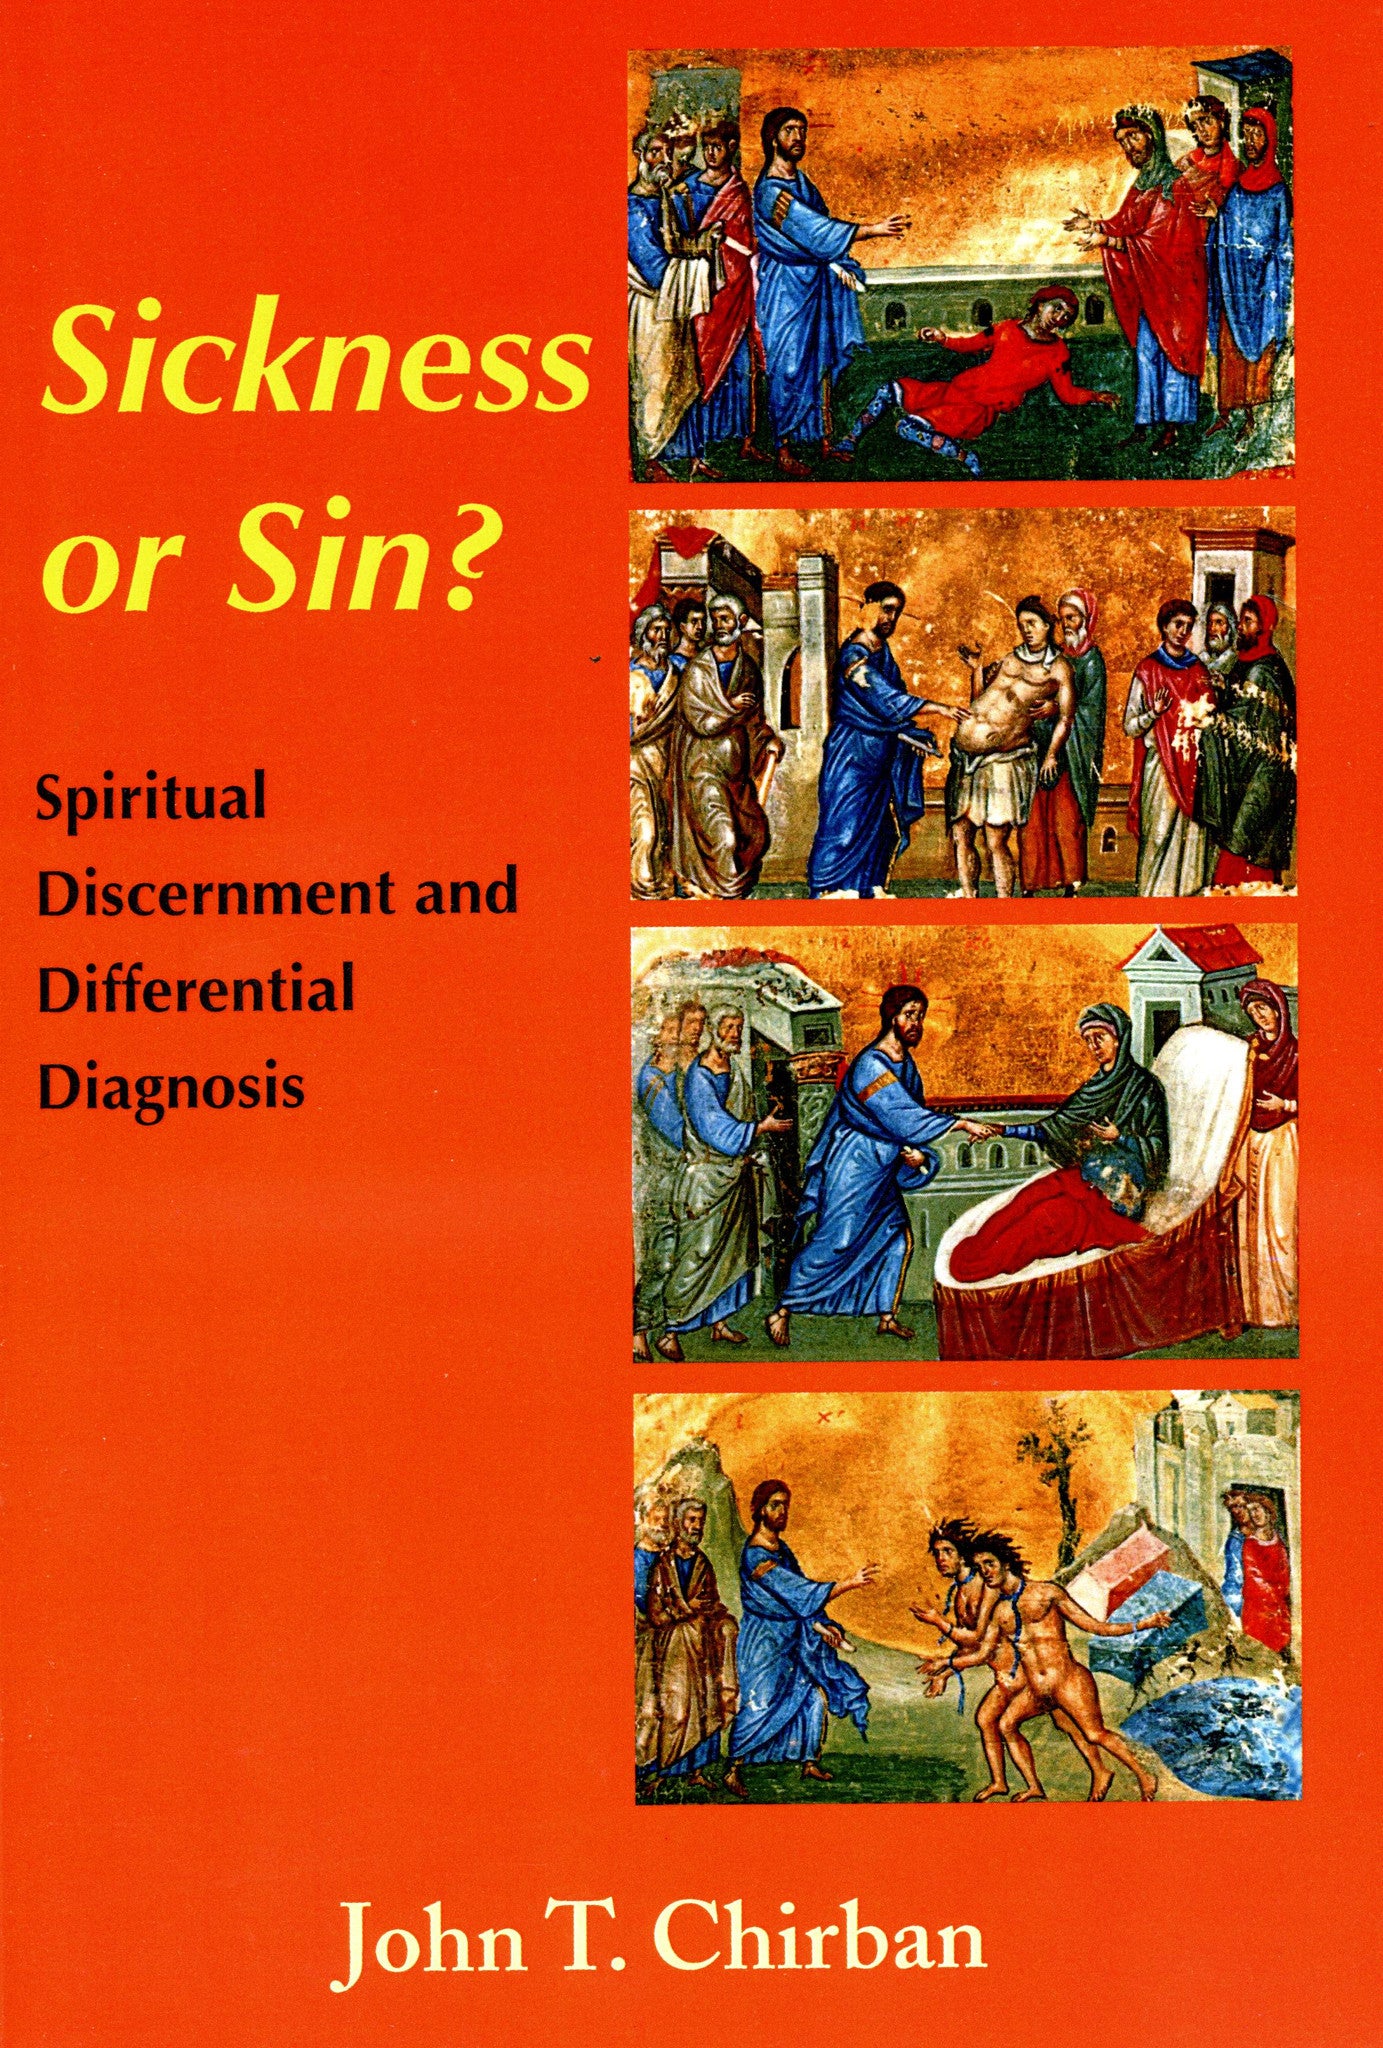 Sickness or Sin? Spiritual Discernment and Differential Diagnosis